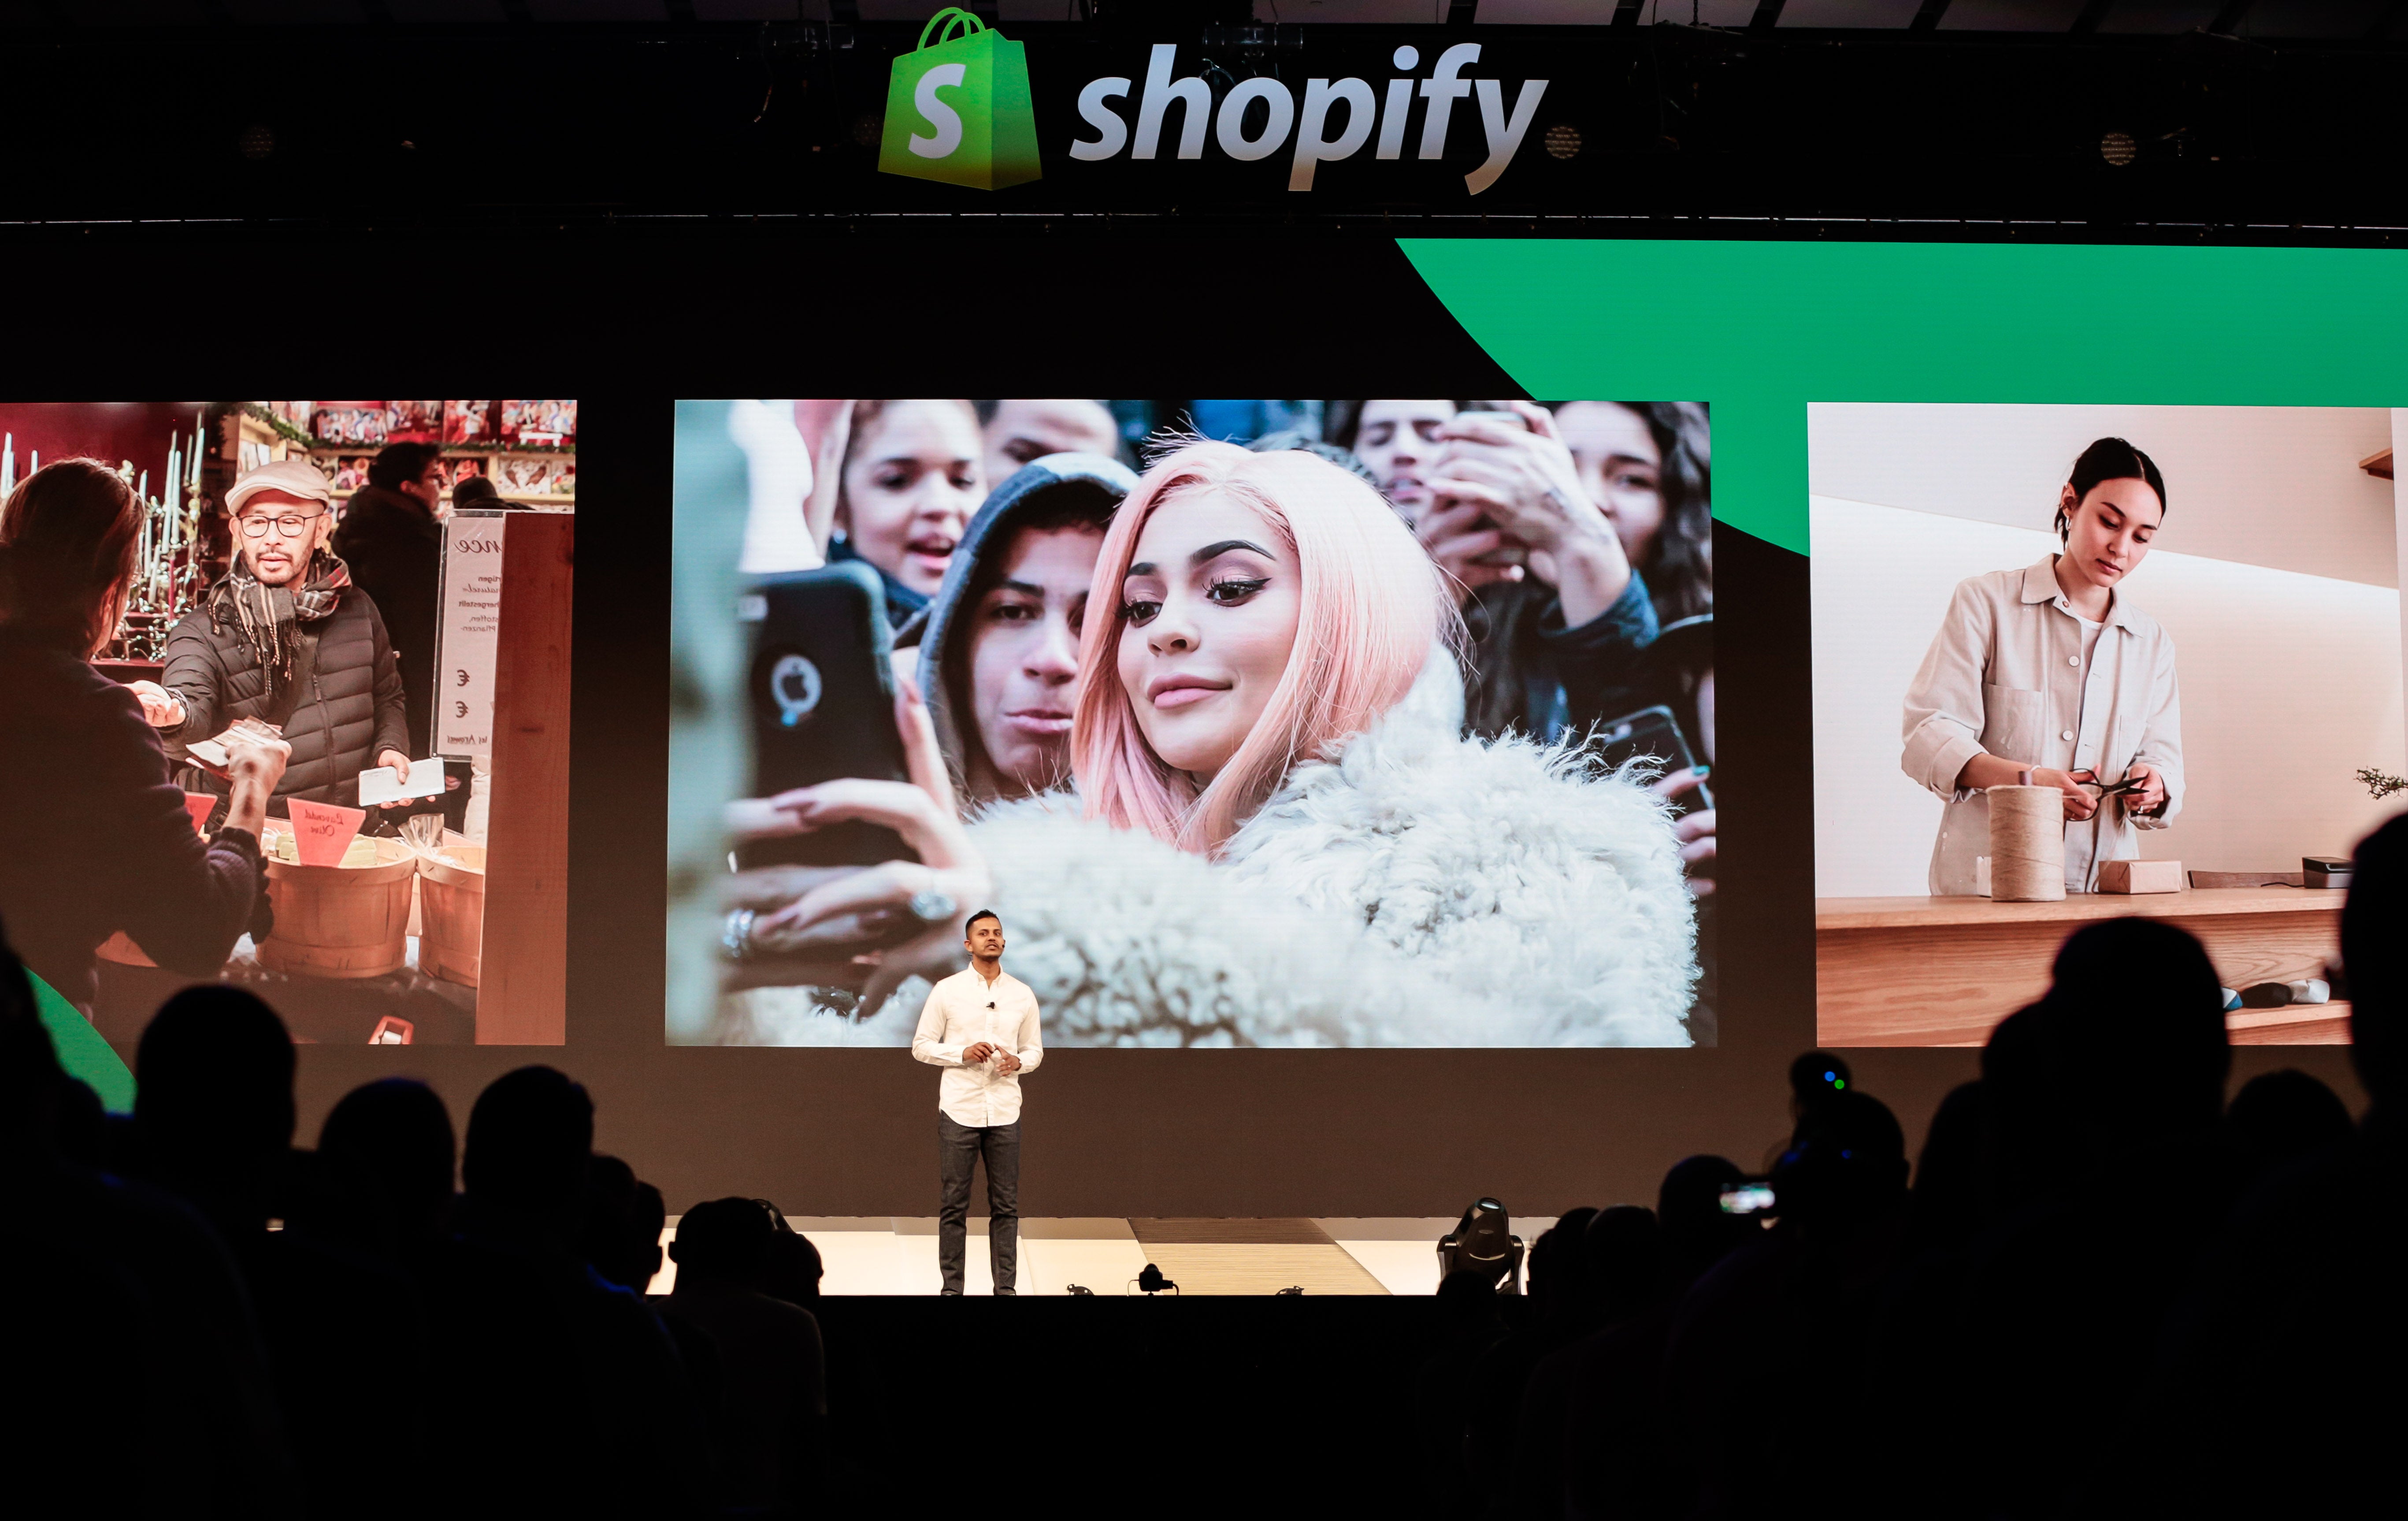 Arpan Podduturi, Shopify’s Director of Product, Retail, announces the new Shopify point of sale (POS) software at the company’s annual partner conference, Shopify Unite, in Toronto, Canada on June 19, 2019.